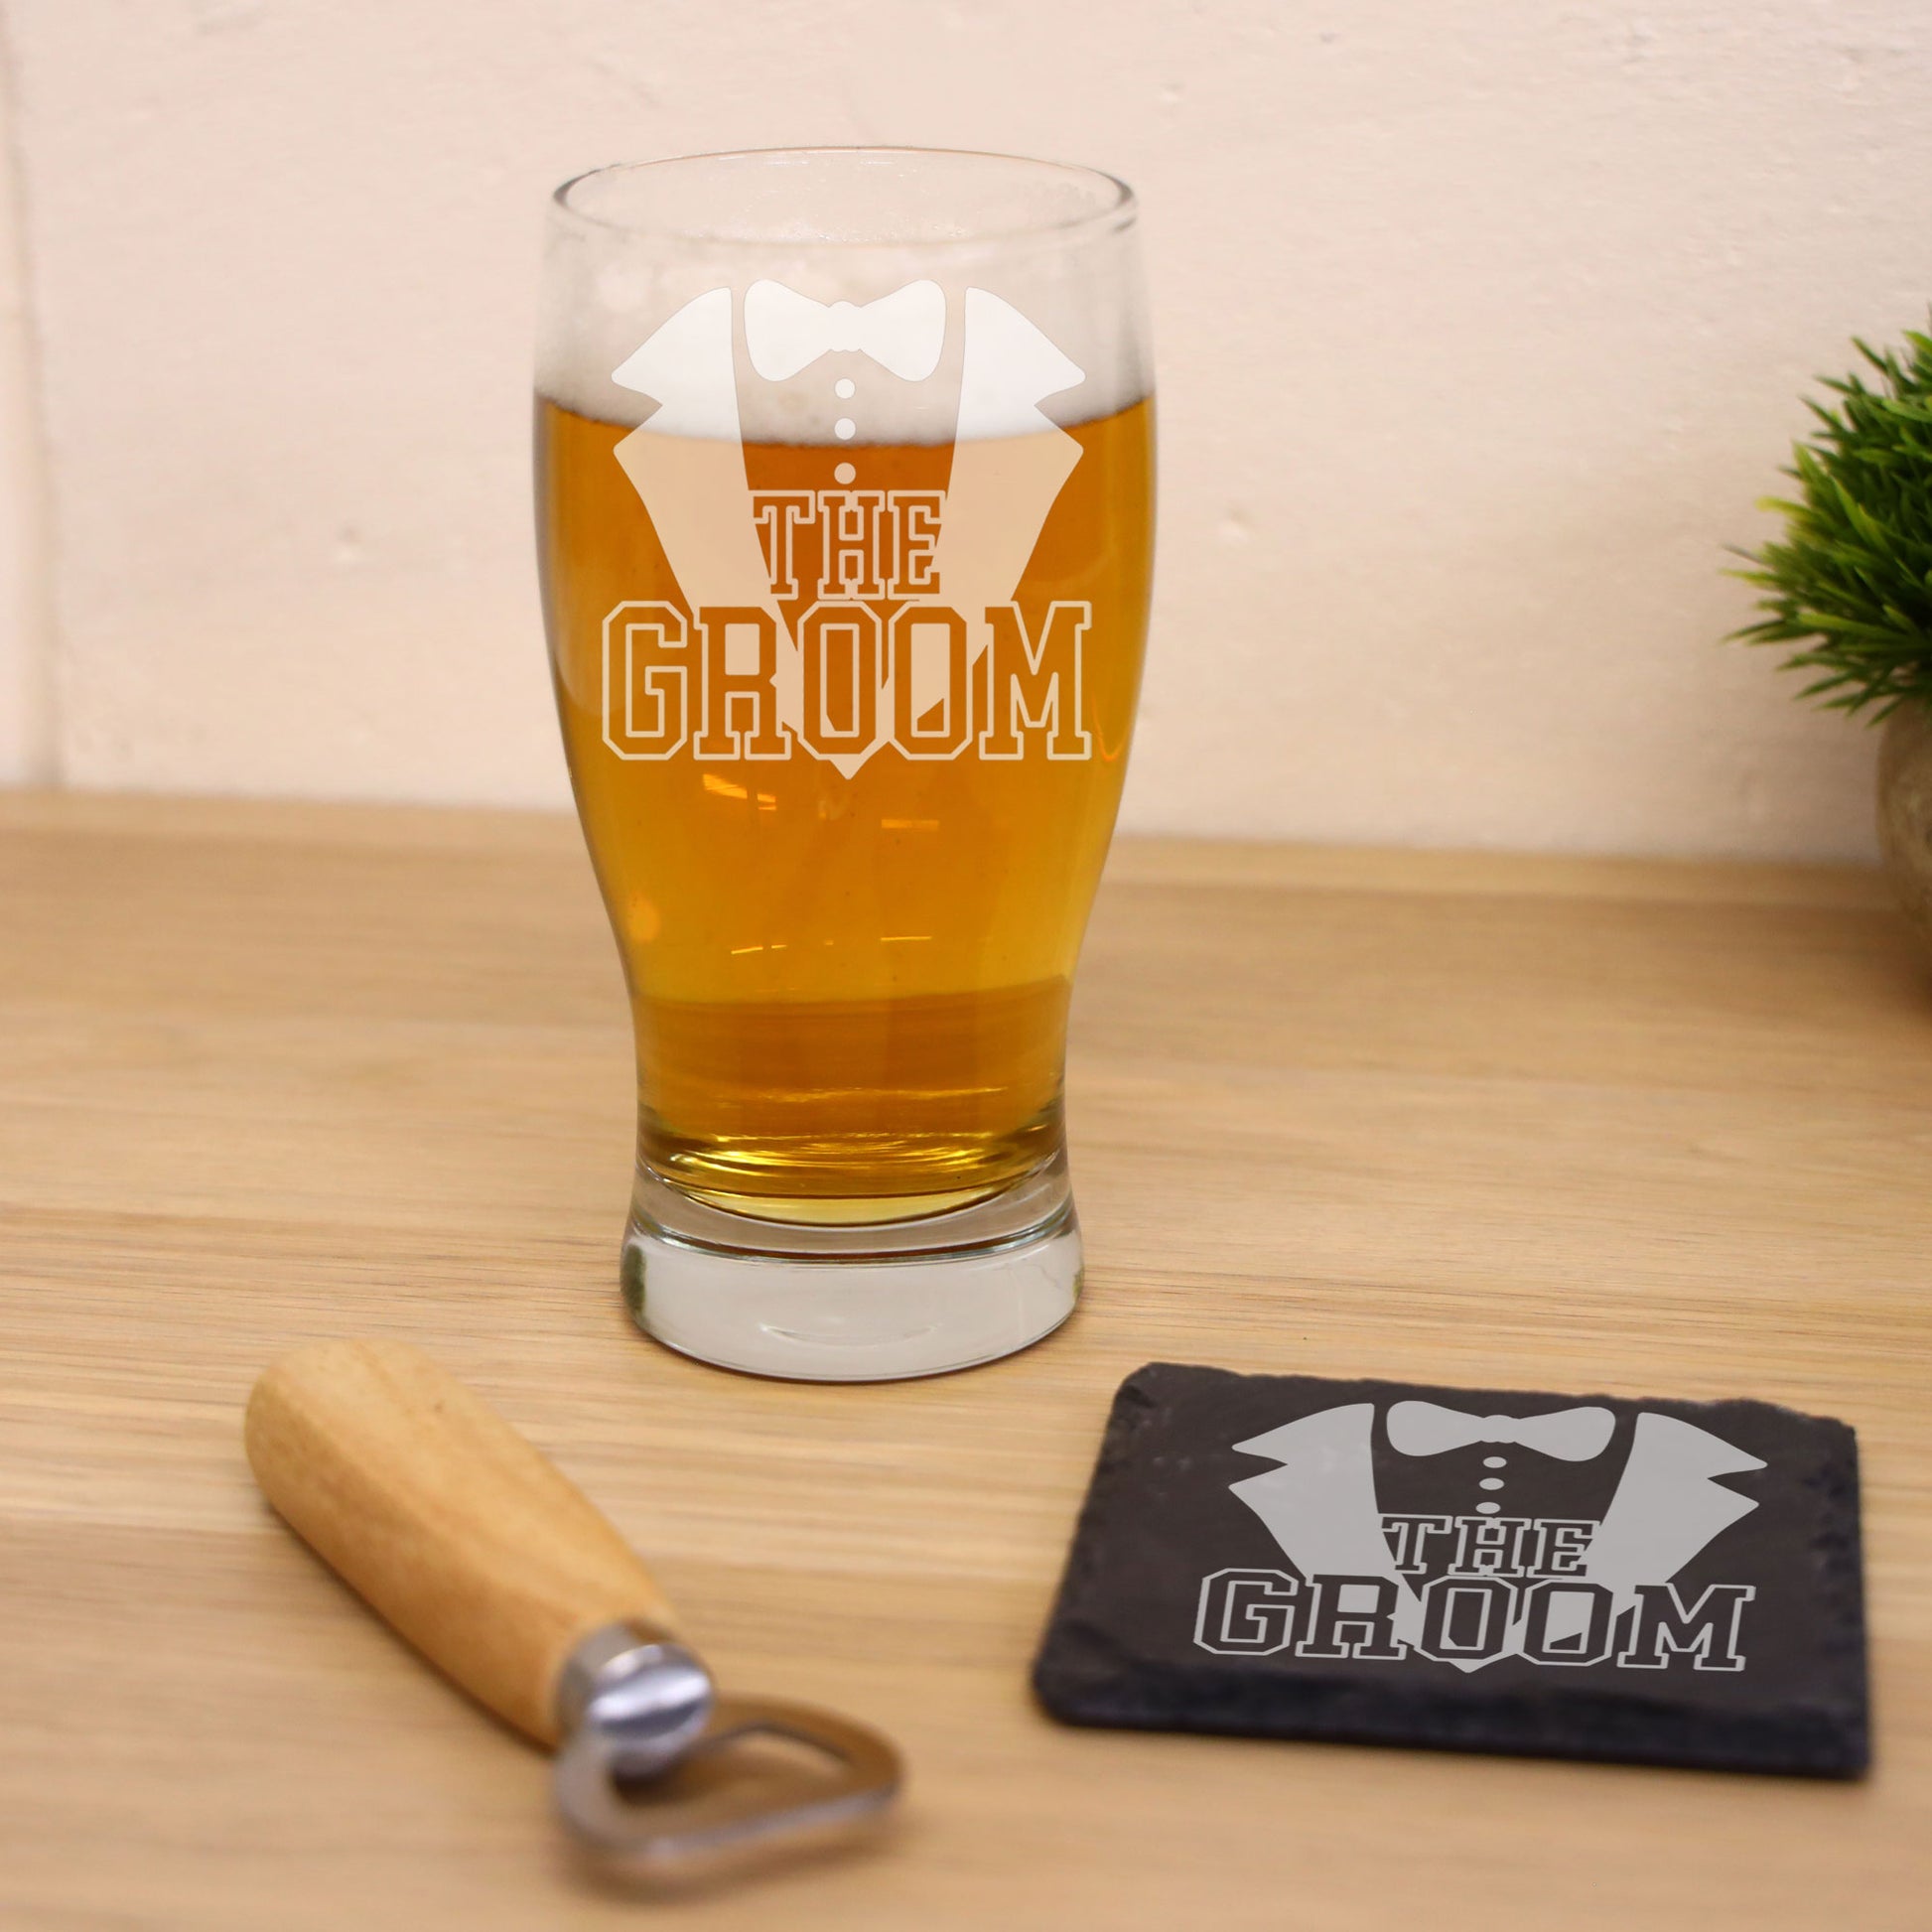 The Groom Engraved Beer Glass and/or Coaster Set  - Always Looking Good - Glass & Square Coaster Set  